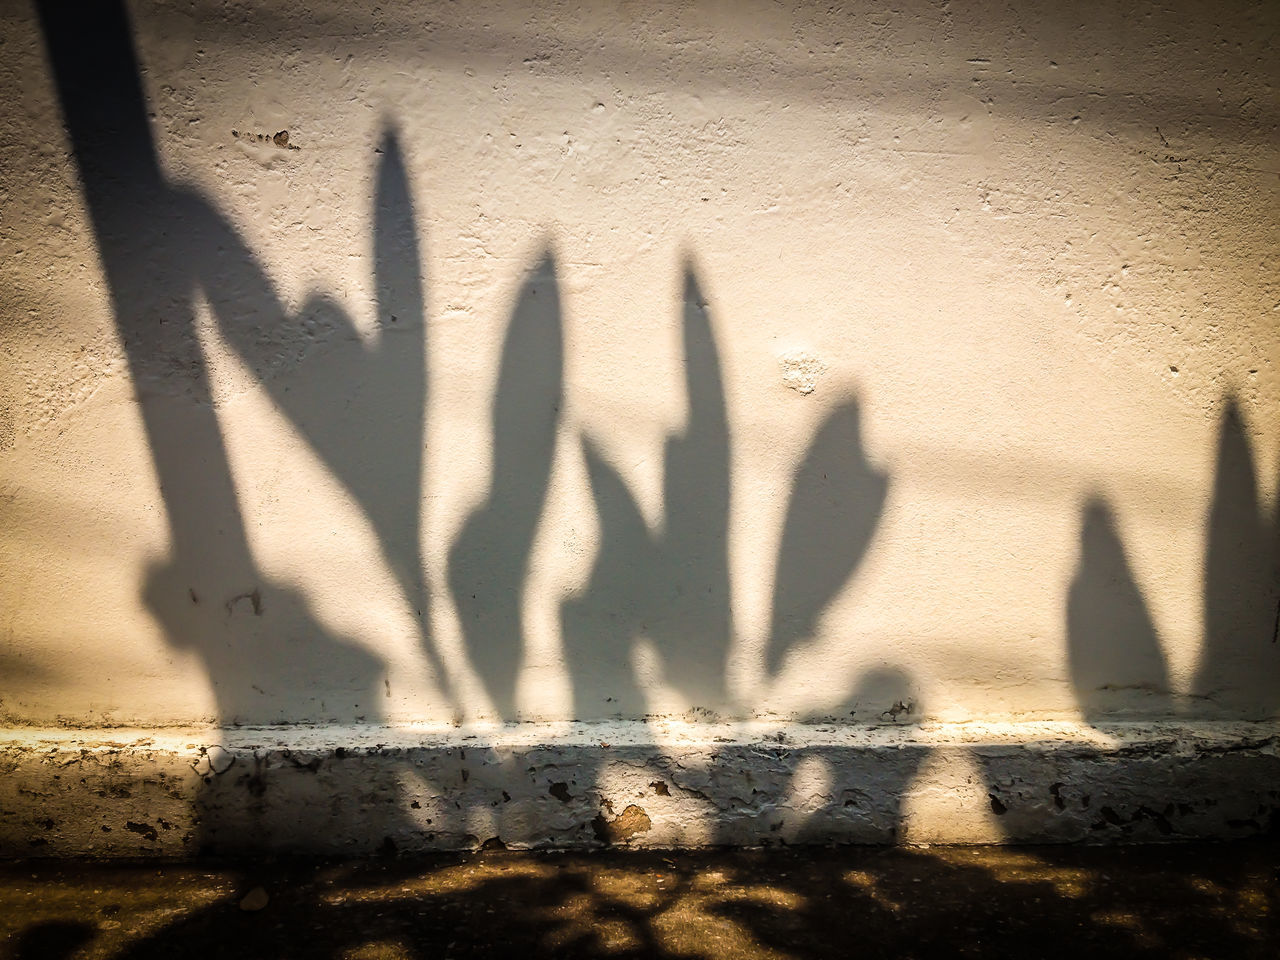 SHADOW OF PEOPLE STANDING ON WALL WITH GRAFFITI